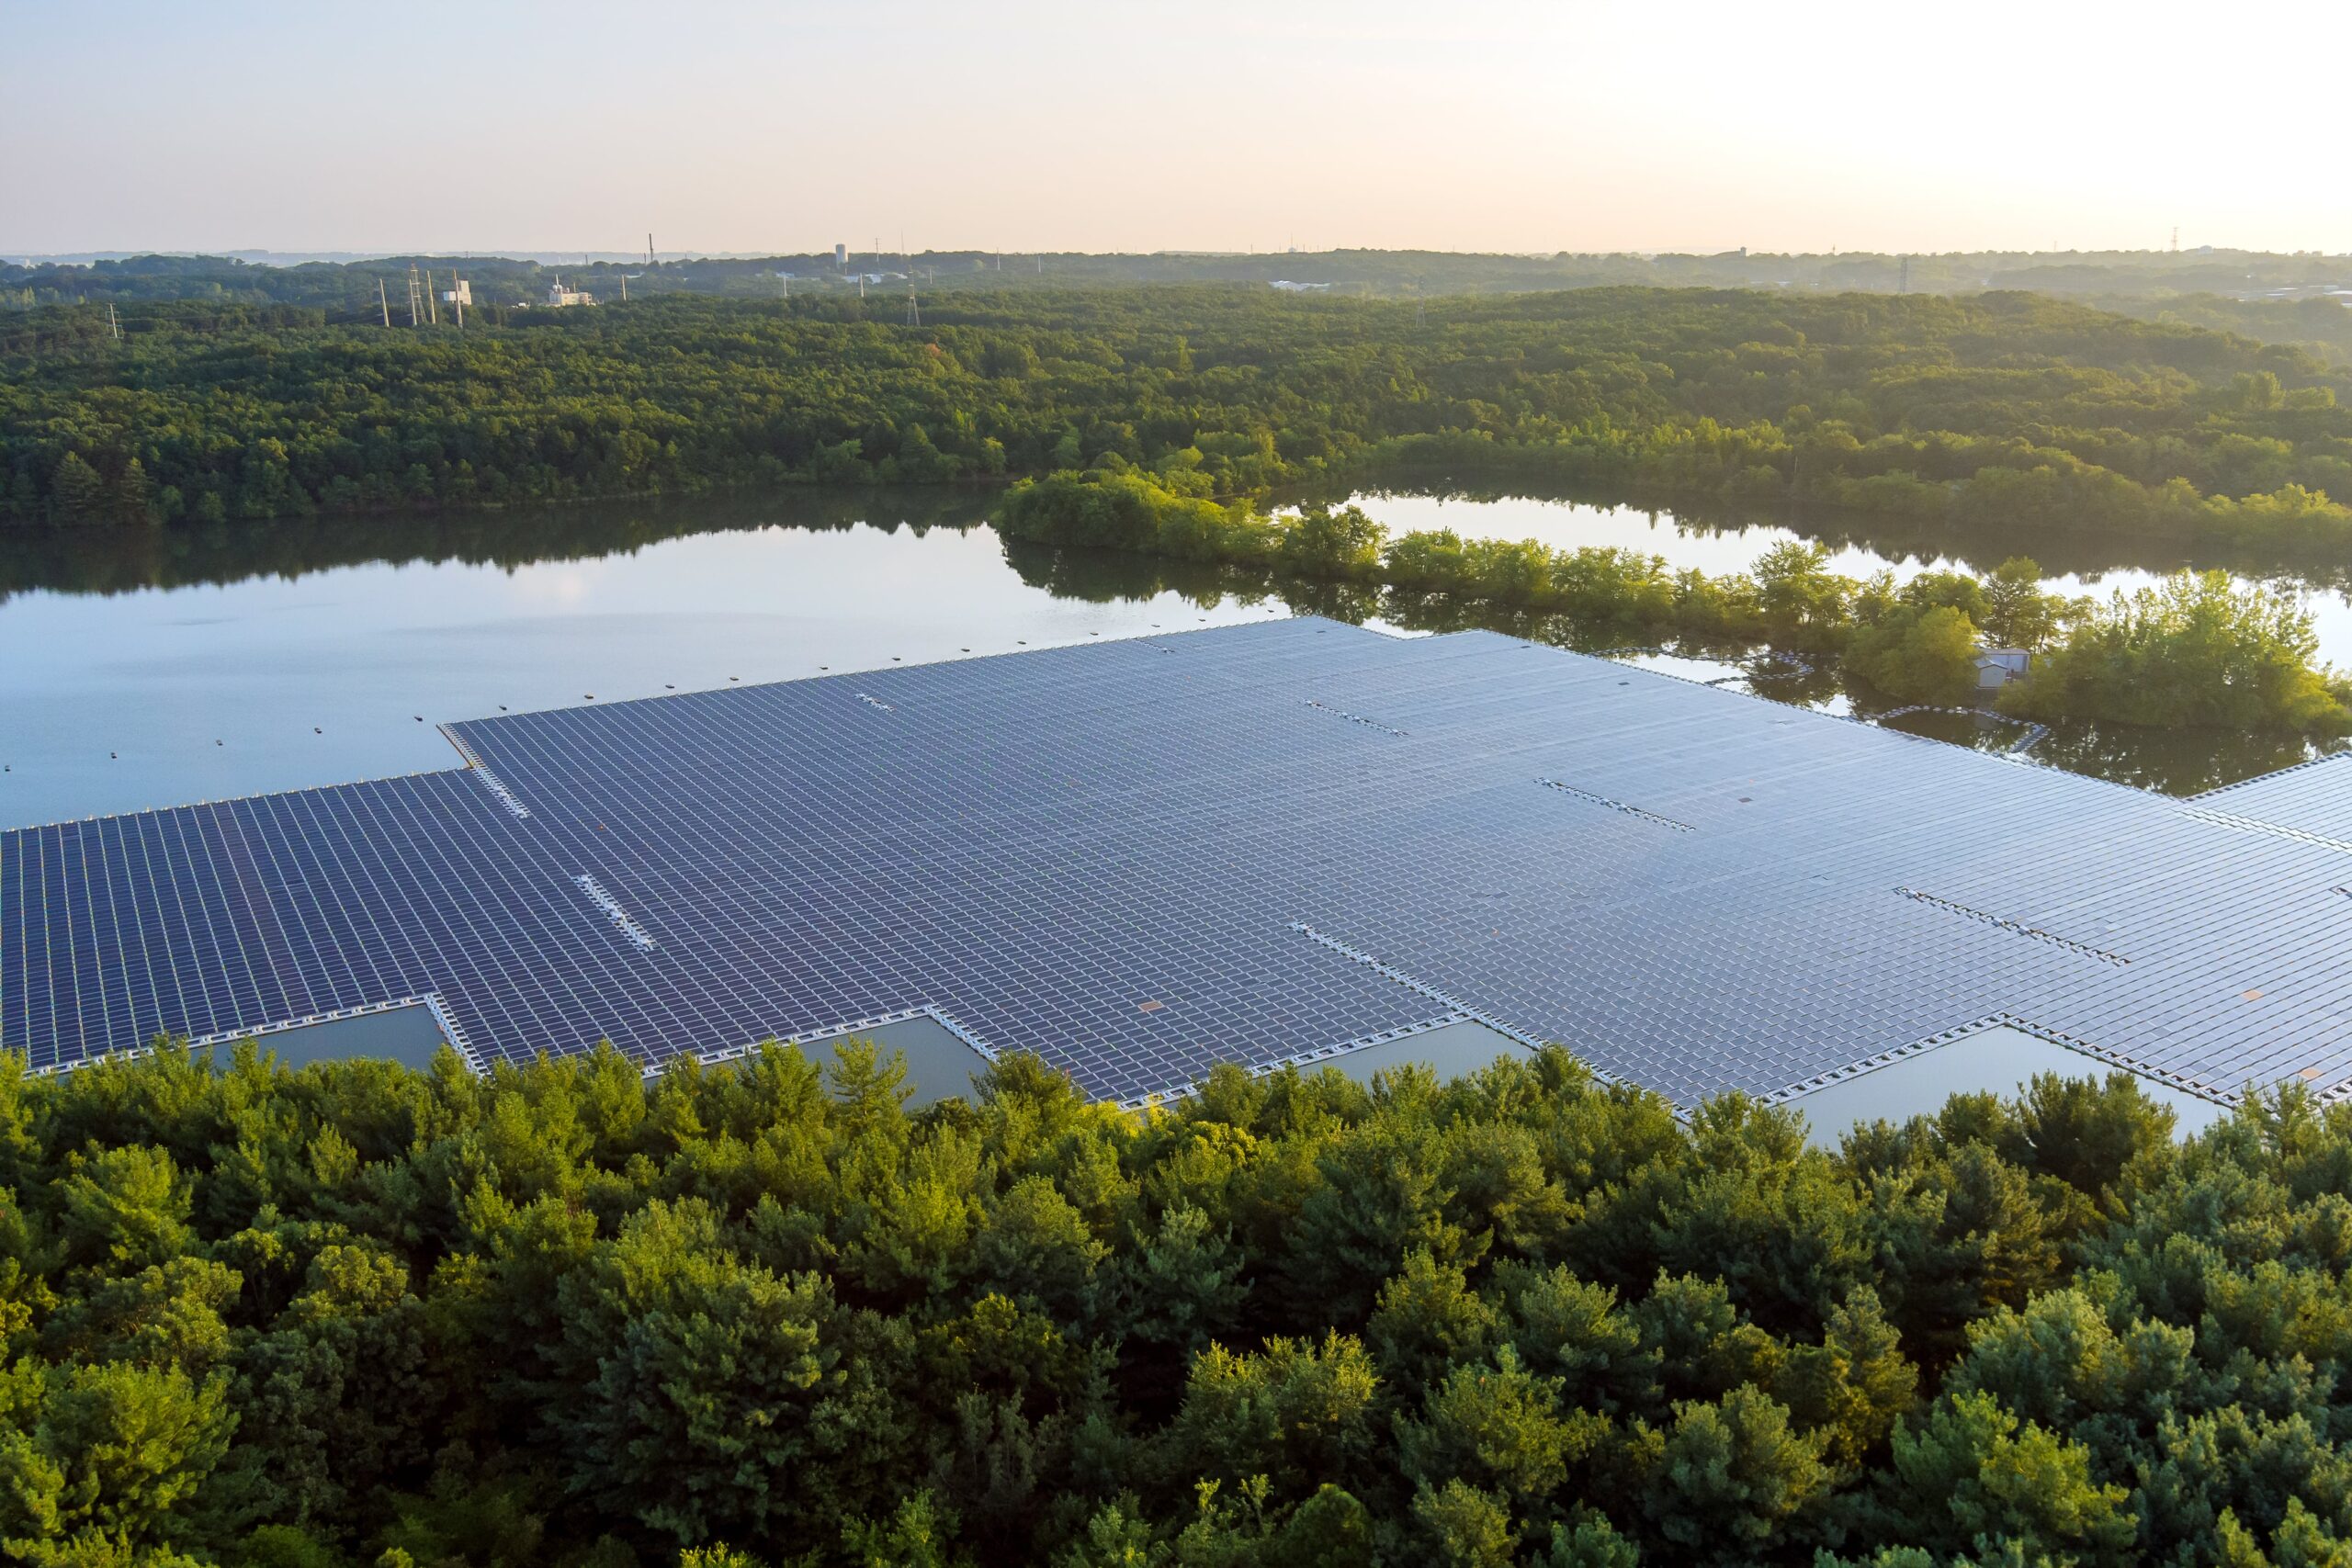 panorama-aerial-view-renewable-alternative-electricity-energy-floating-solar-panels-cell-platform-beautiful-lake-min